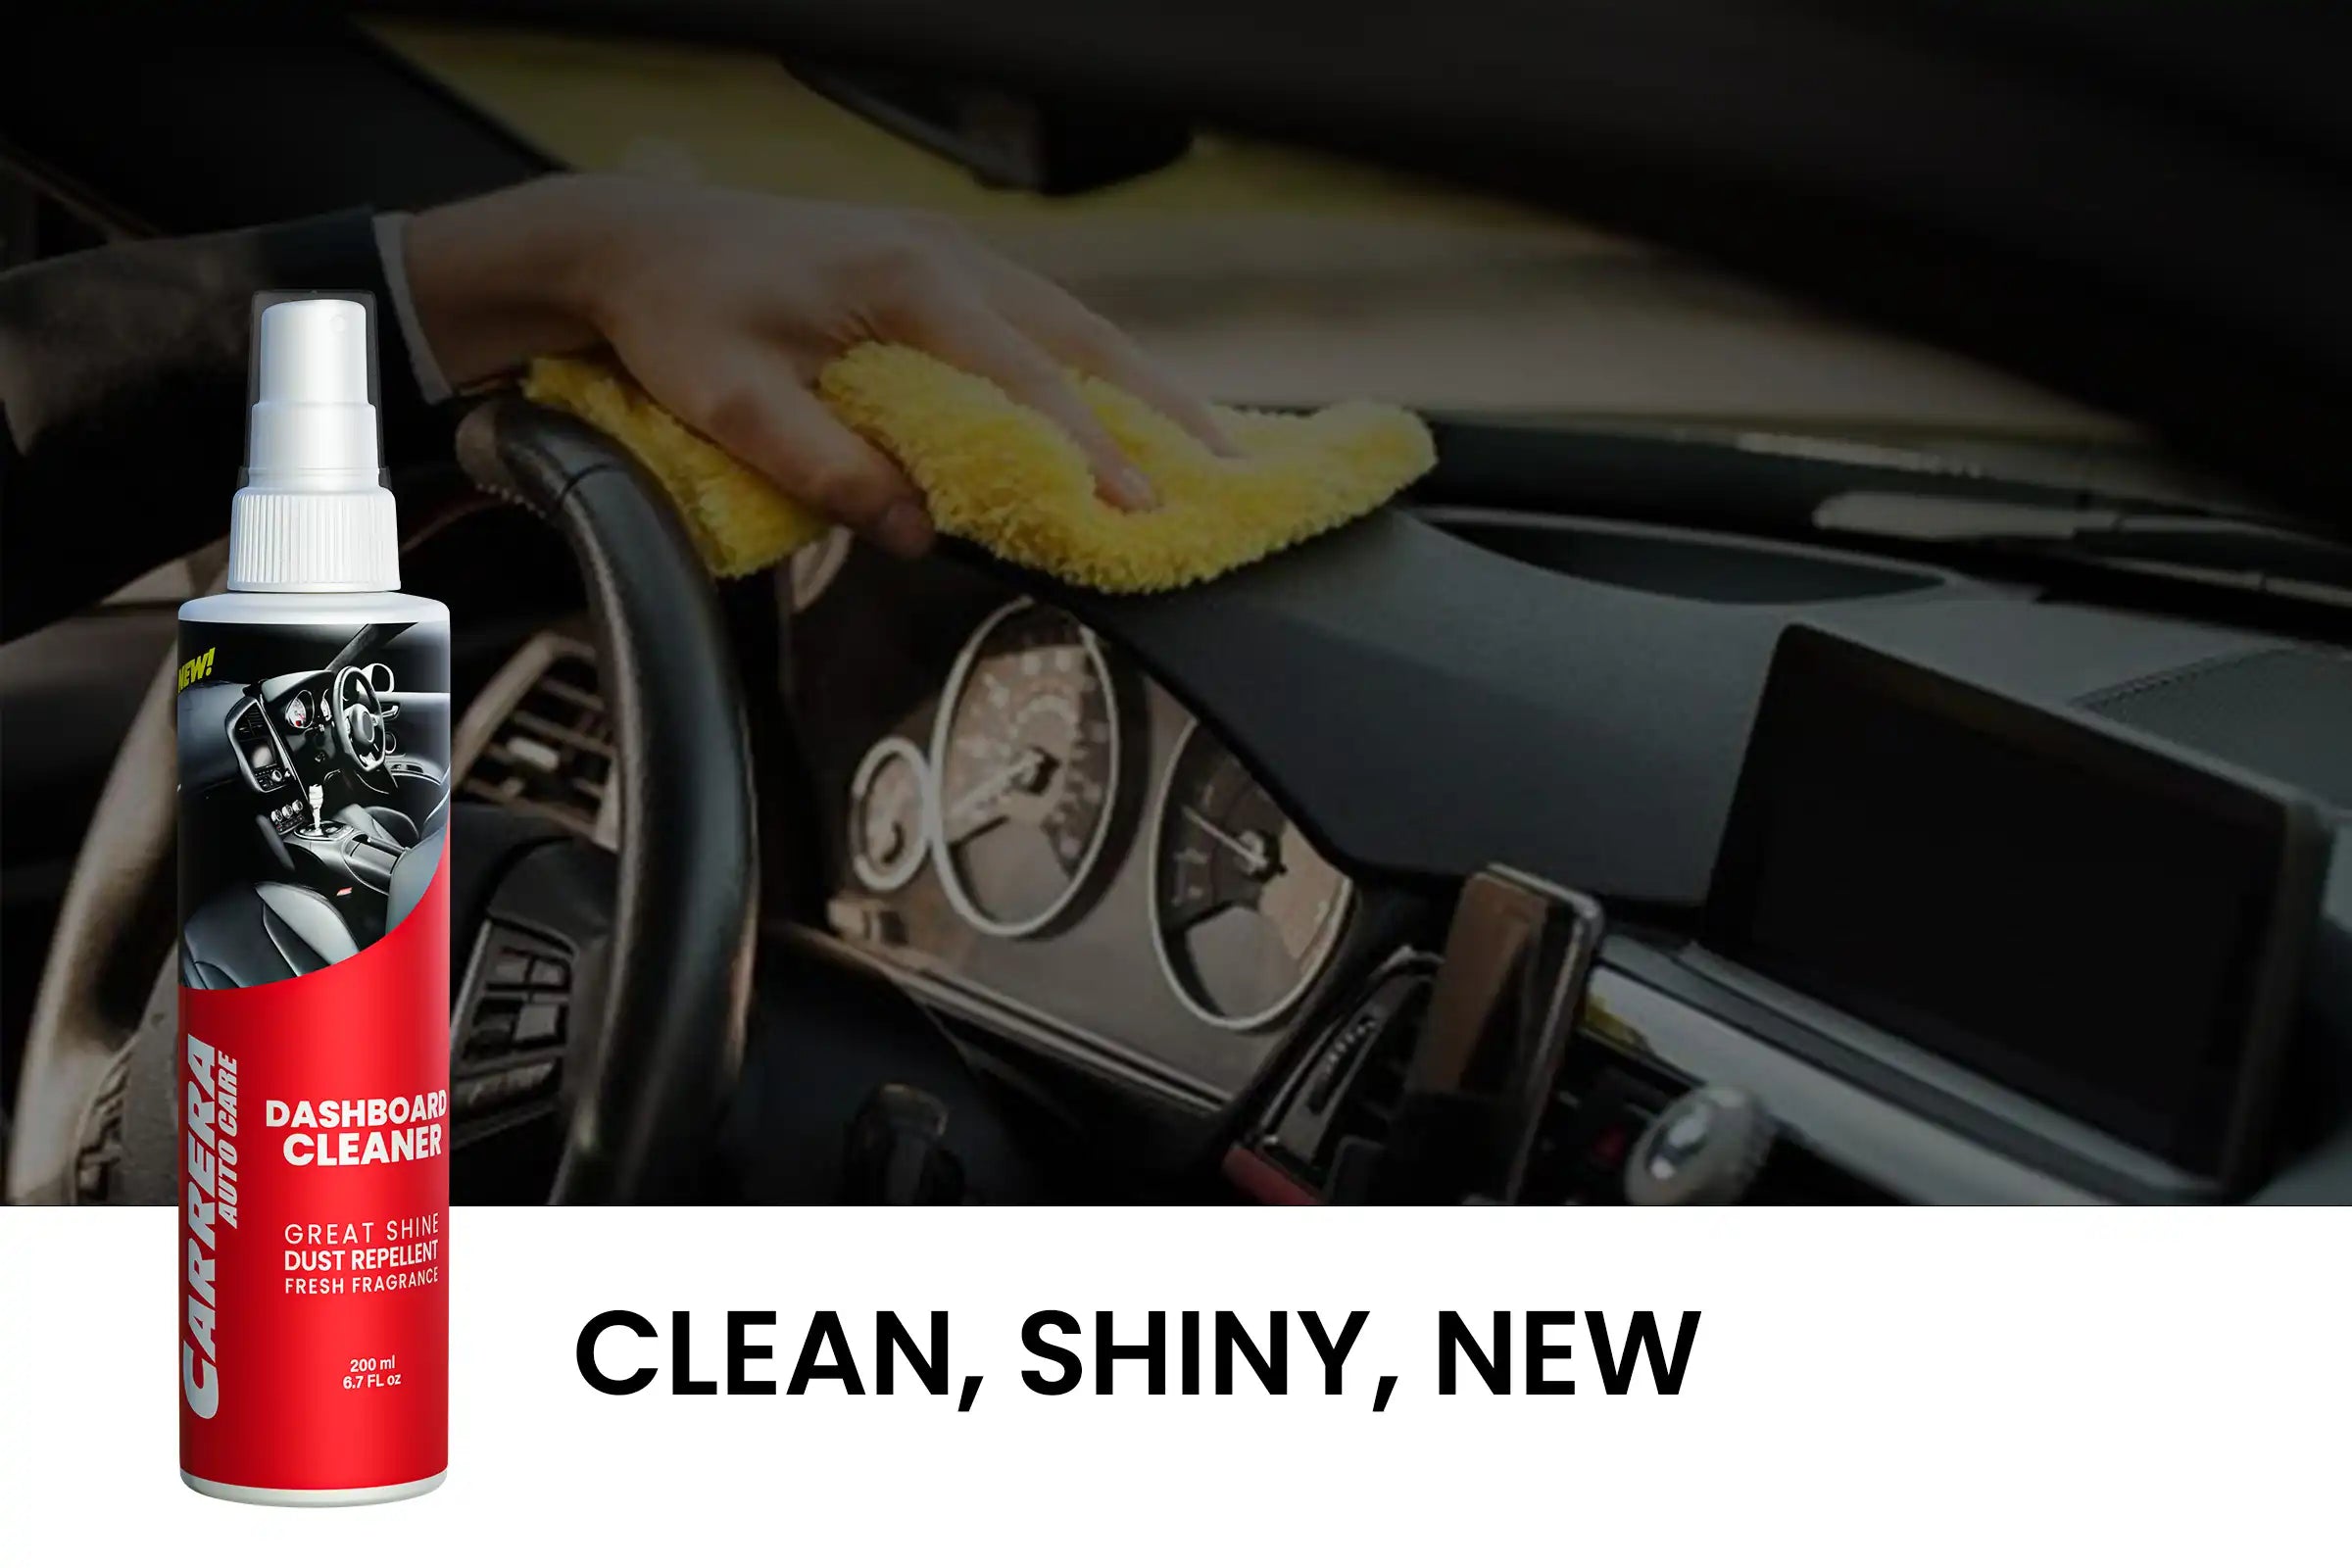 Are You Using Carrera's Top Secret Dashboard Cleaner for Auto Care?